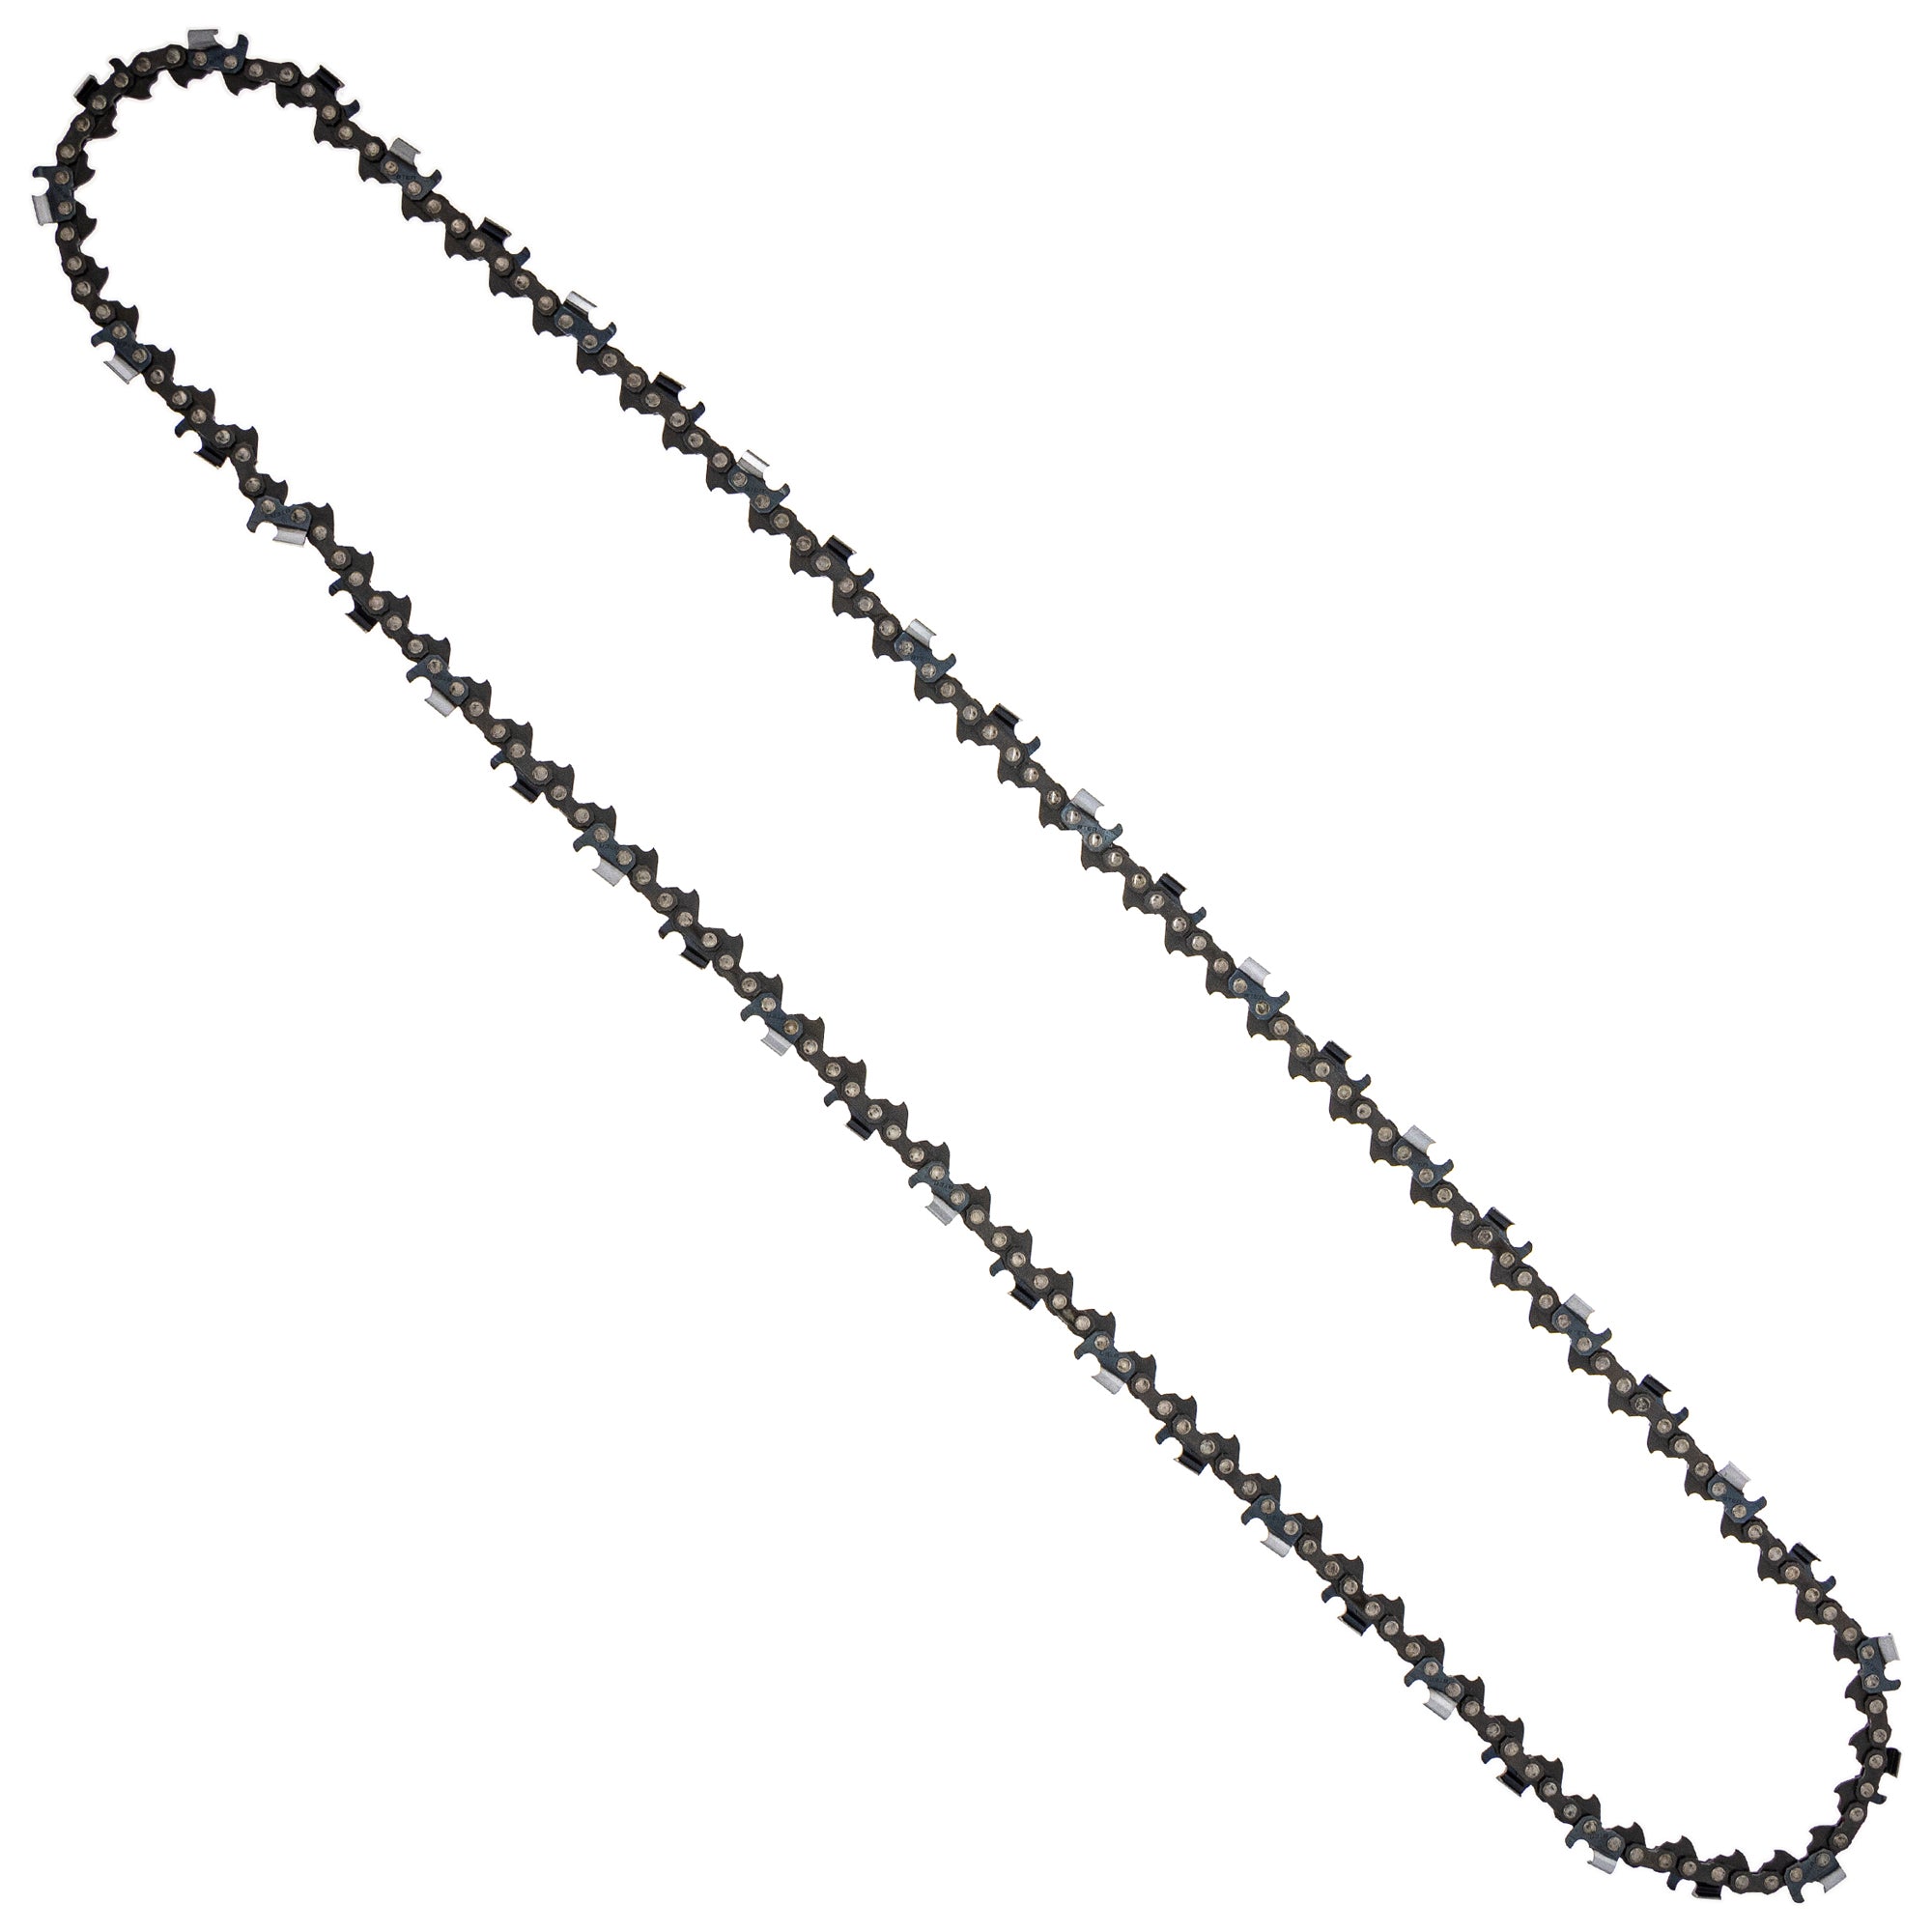 8TEN 810-CCC2212H Chain 2-Pack for zOTHER Oregon MS 066 064 056